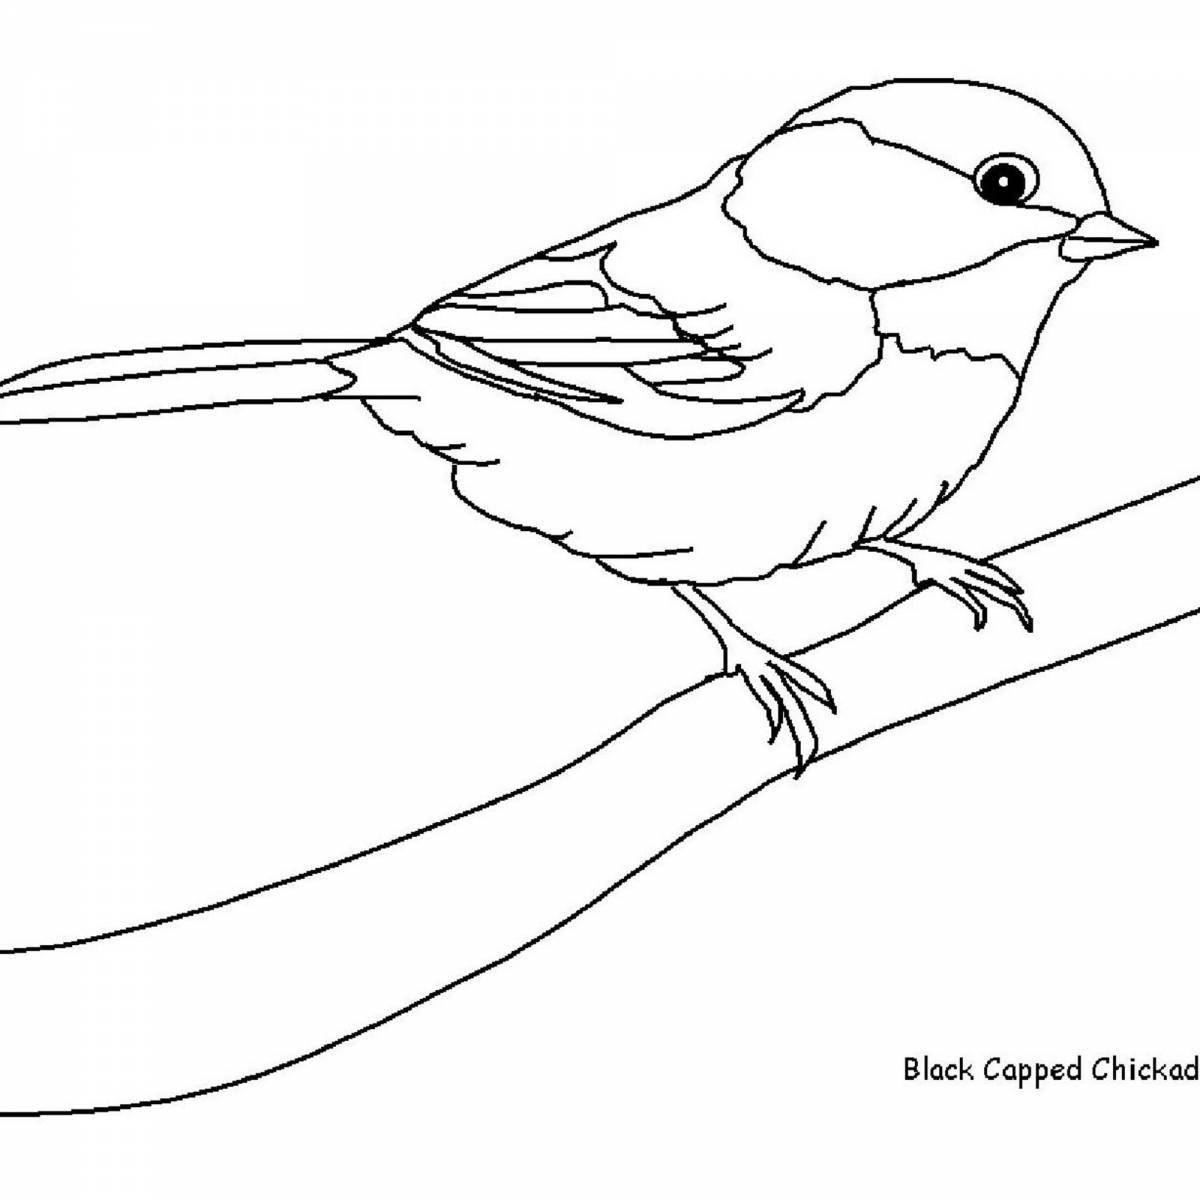 Coloring page joyful titmouse for children 4-5 years old